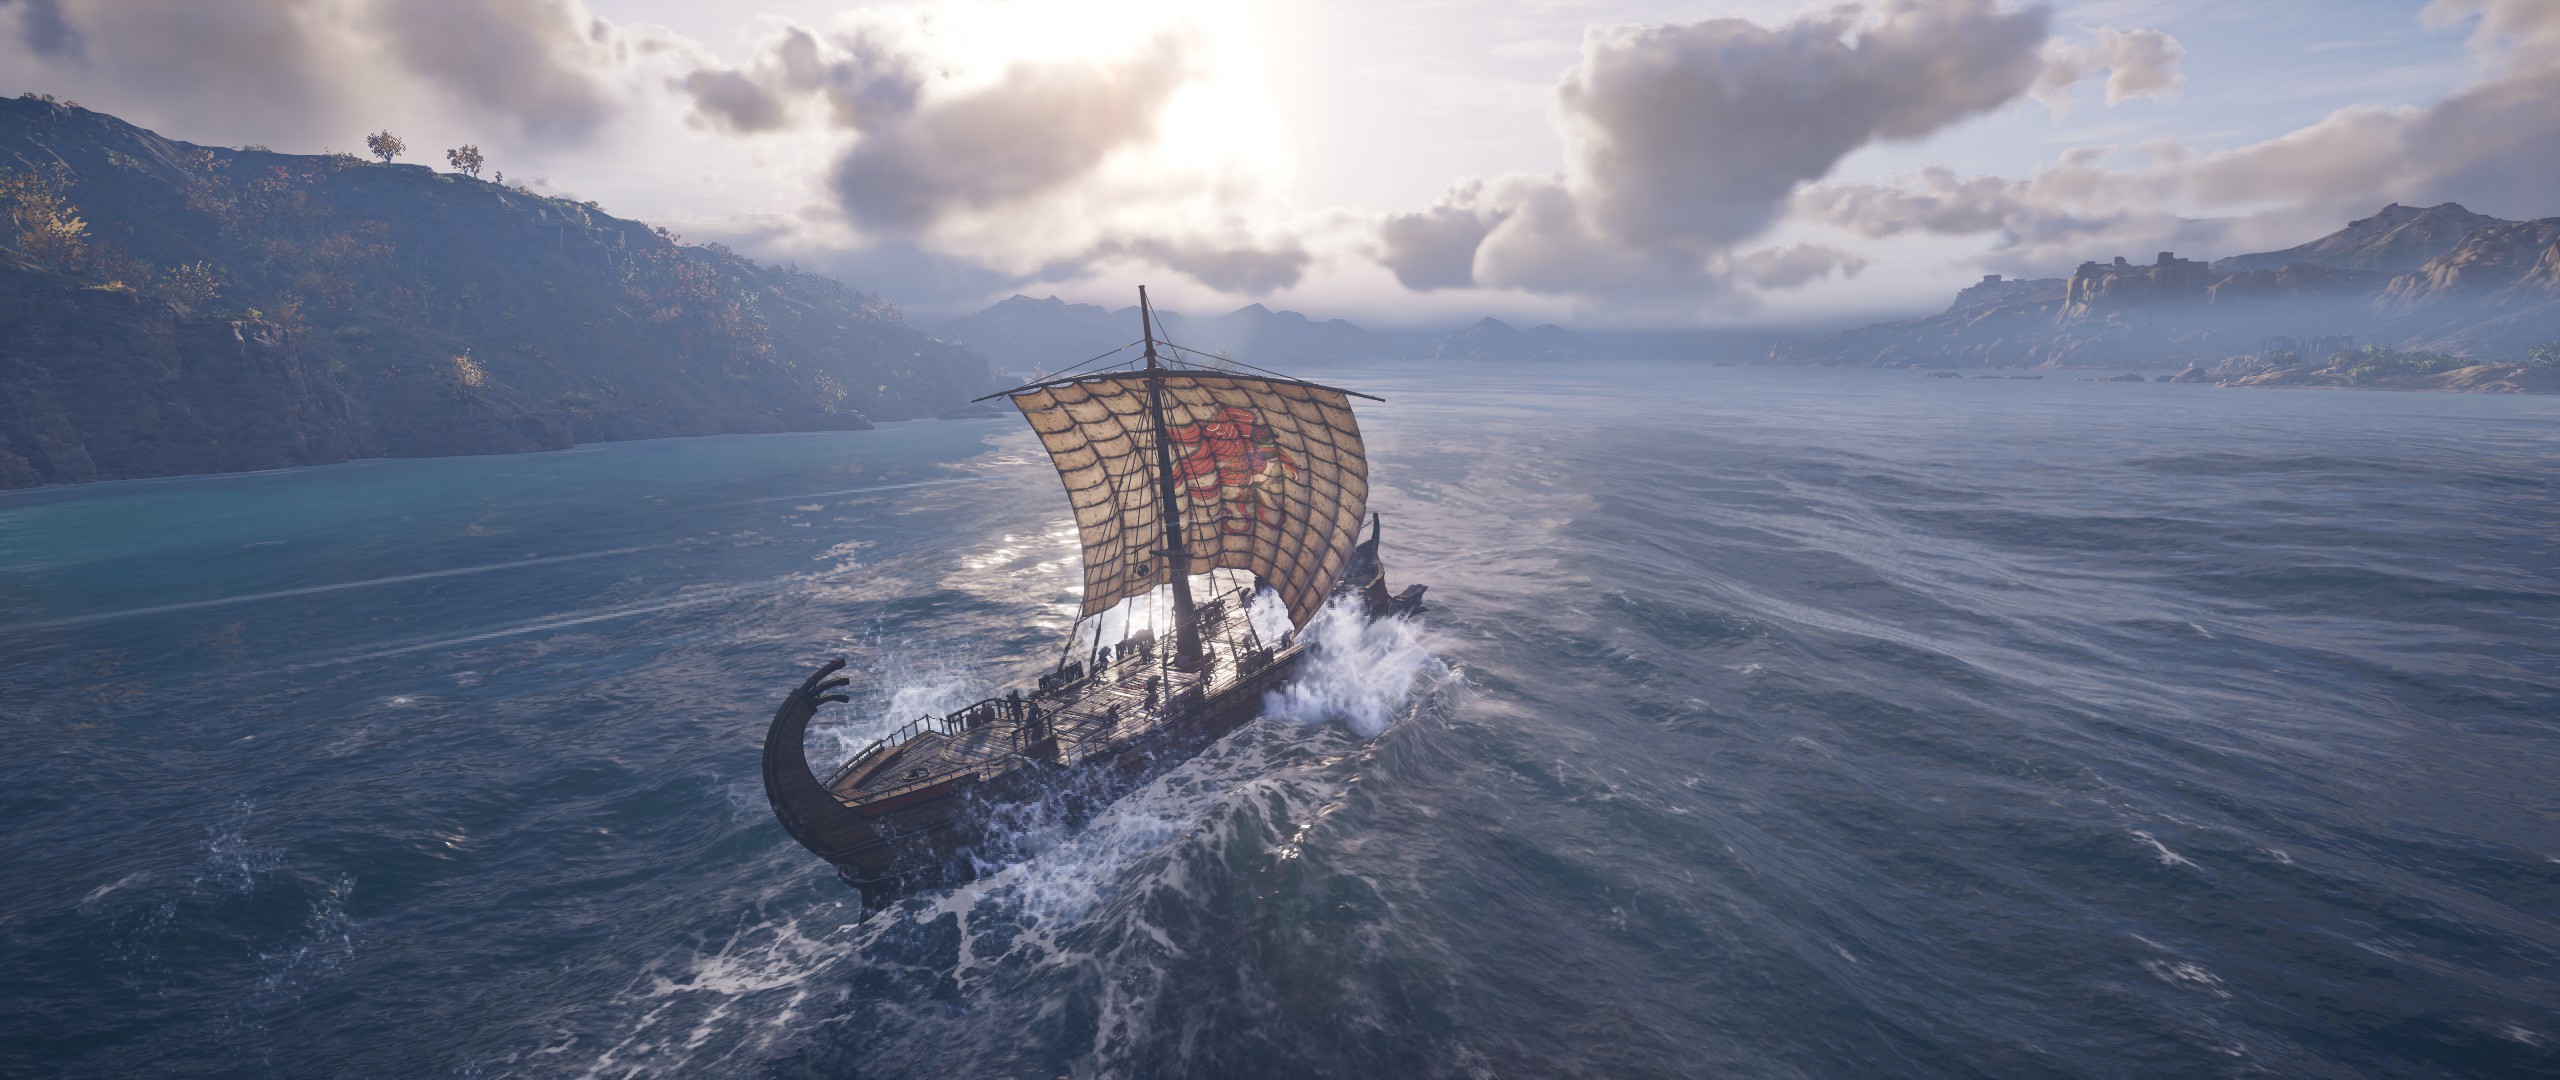 Assassin's Creed Odyssey HUD Game Settings Guide - Customization